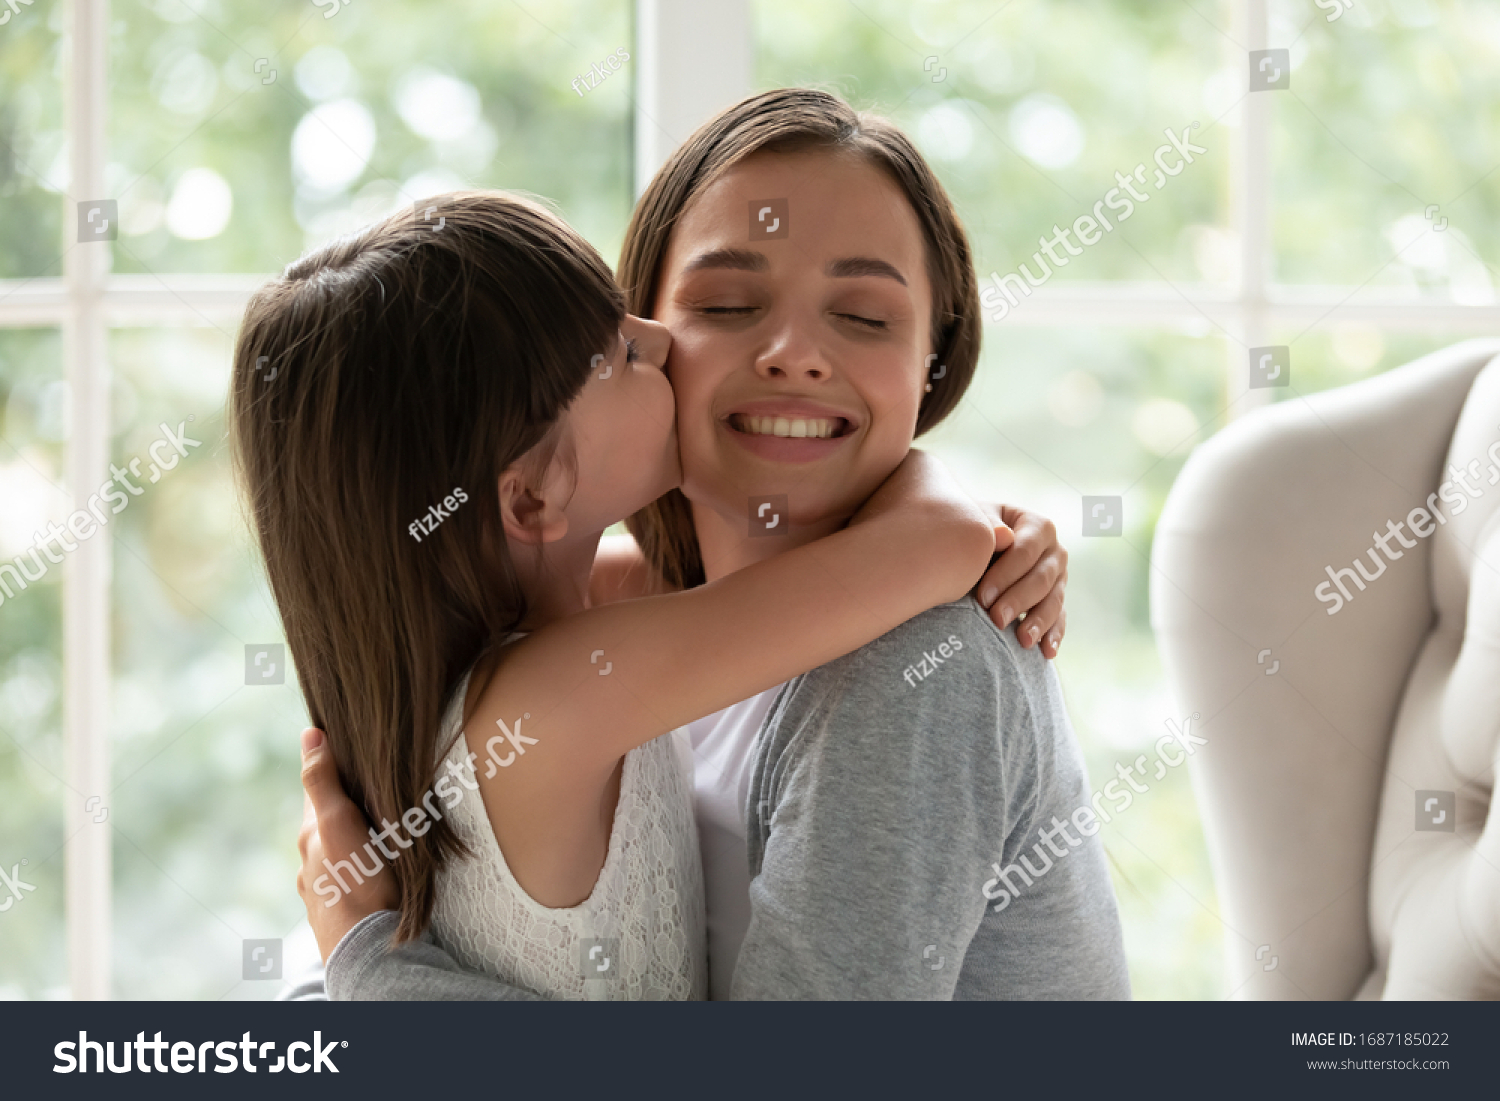 Cute little girl child kiss on cheek overjoyed young mother or nanny show love and care, small preschooler daughter cuddle hug happy mom, feel grateful and thankful, family bonding, unity concept #1687185022